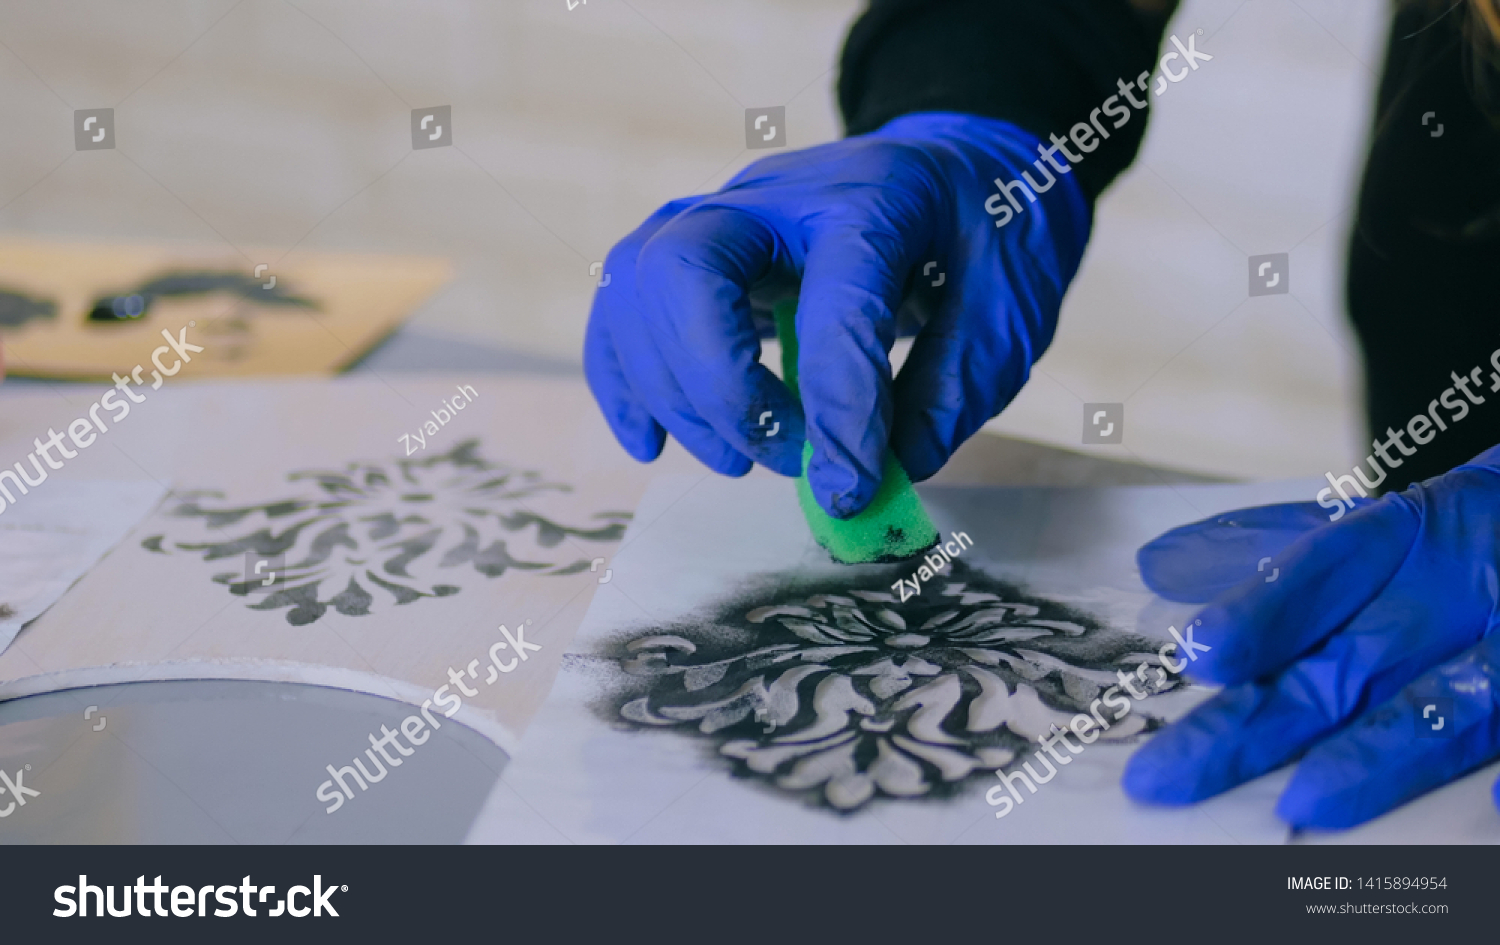 Stencil painting: close up shot of woman hands painting wooden circle. Paint, handmade and crafting work concept #1415894954